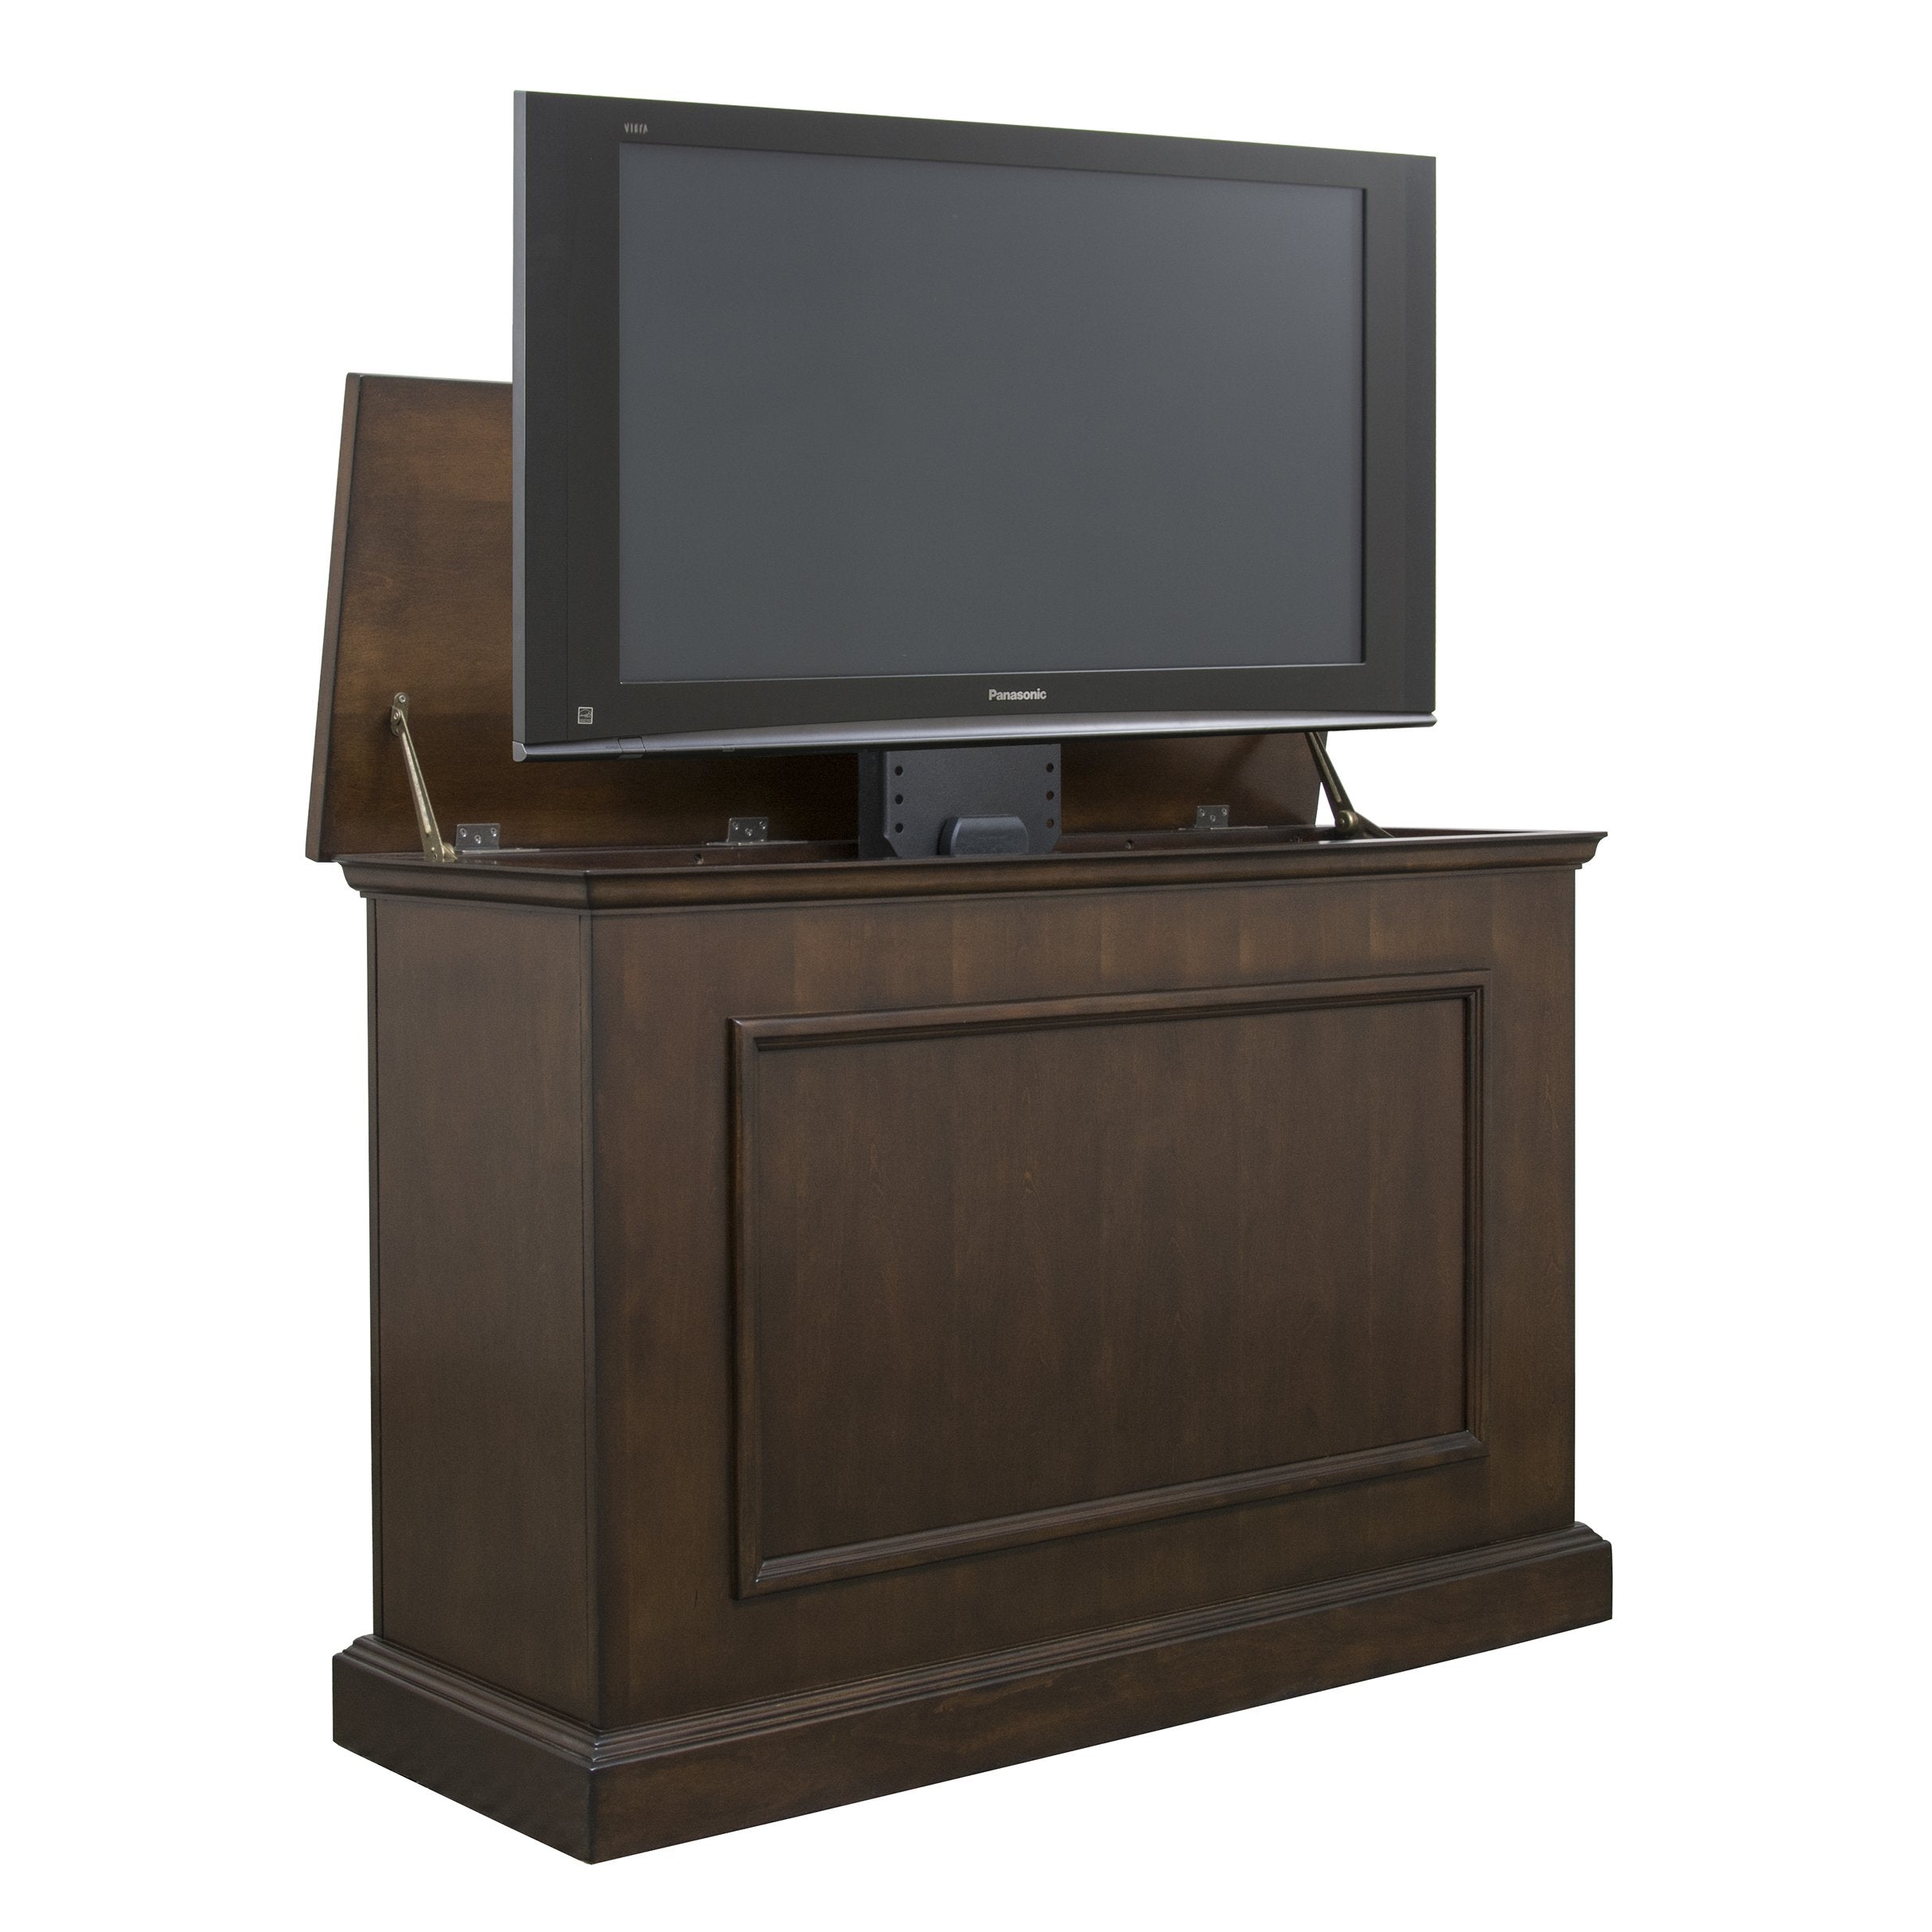 Mini Elevate 75008 Espresso TV Lift Cabinet for Flat screen TVs - Touchstone Home Products, Inc.